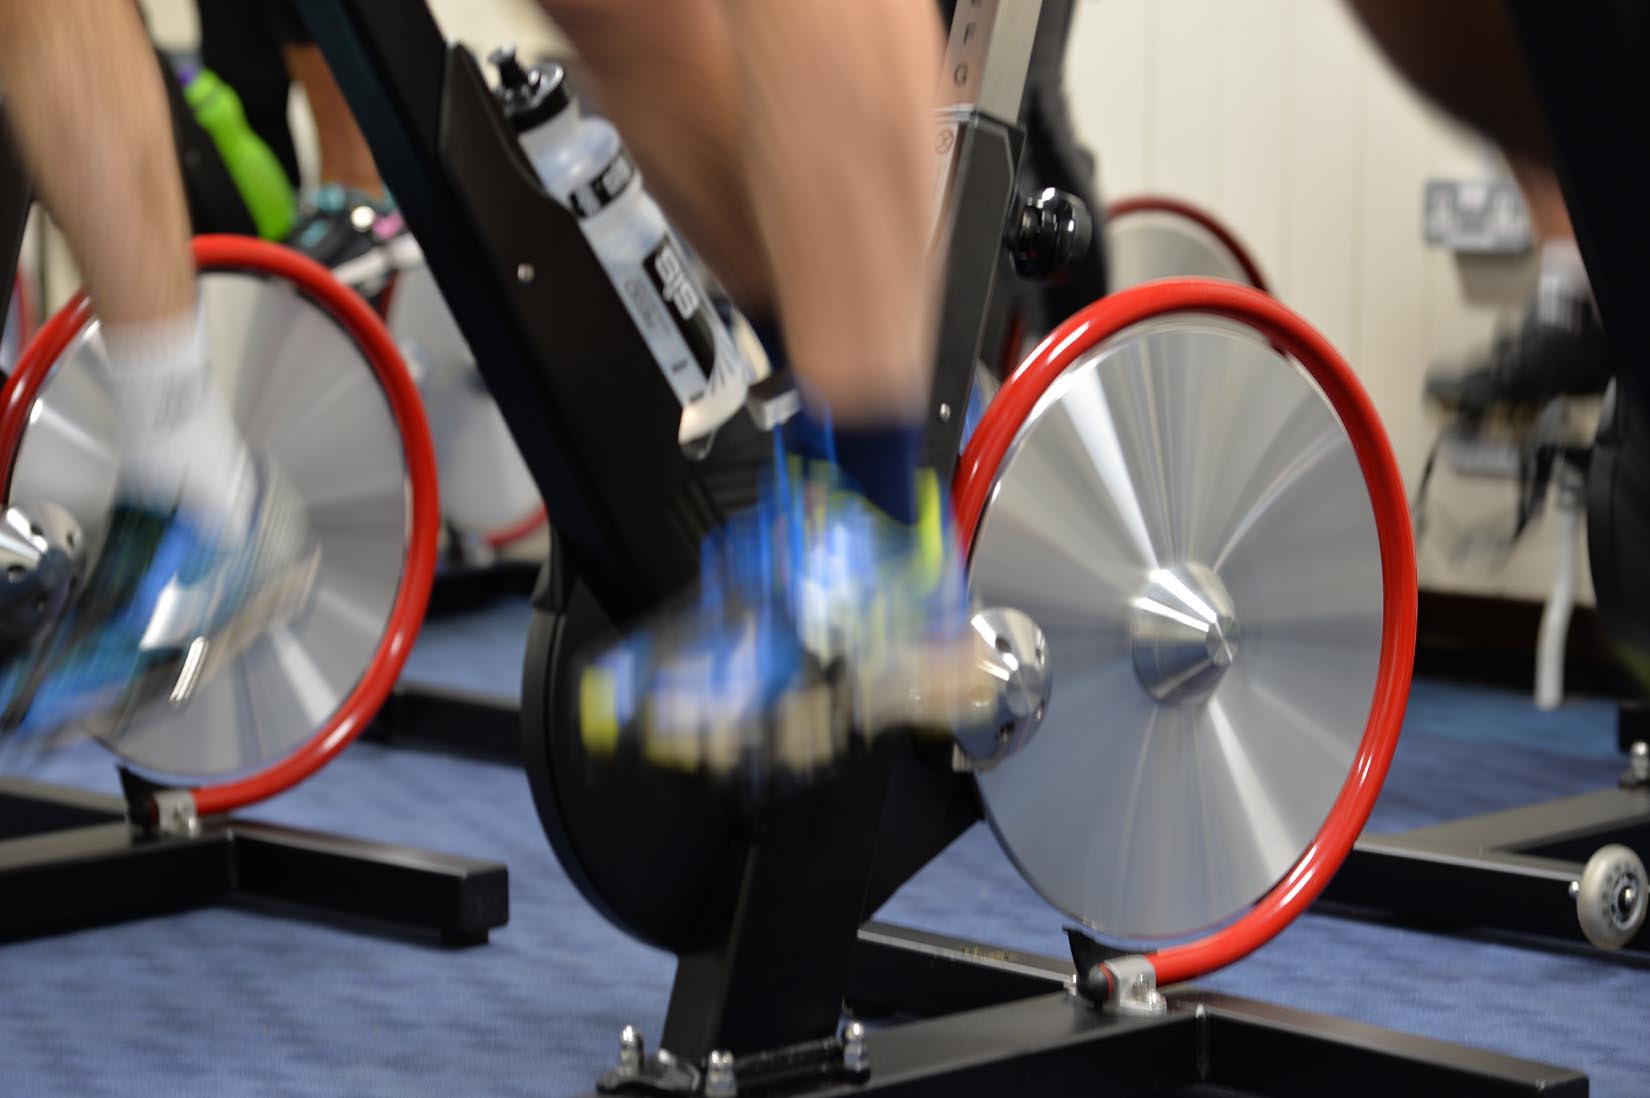 An exercise bike in use at the Sports Centre, legs and wheels blurred indicating movement